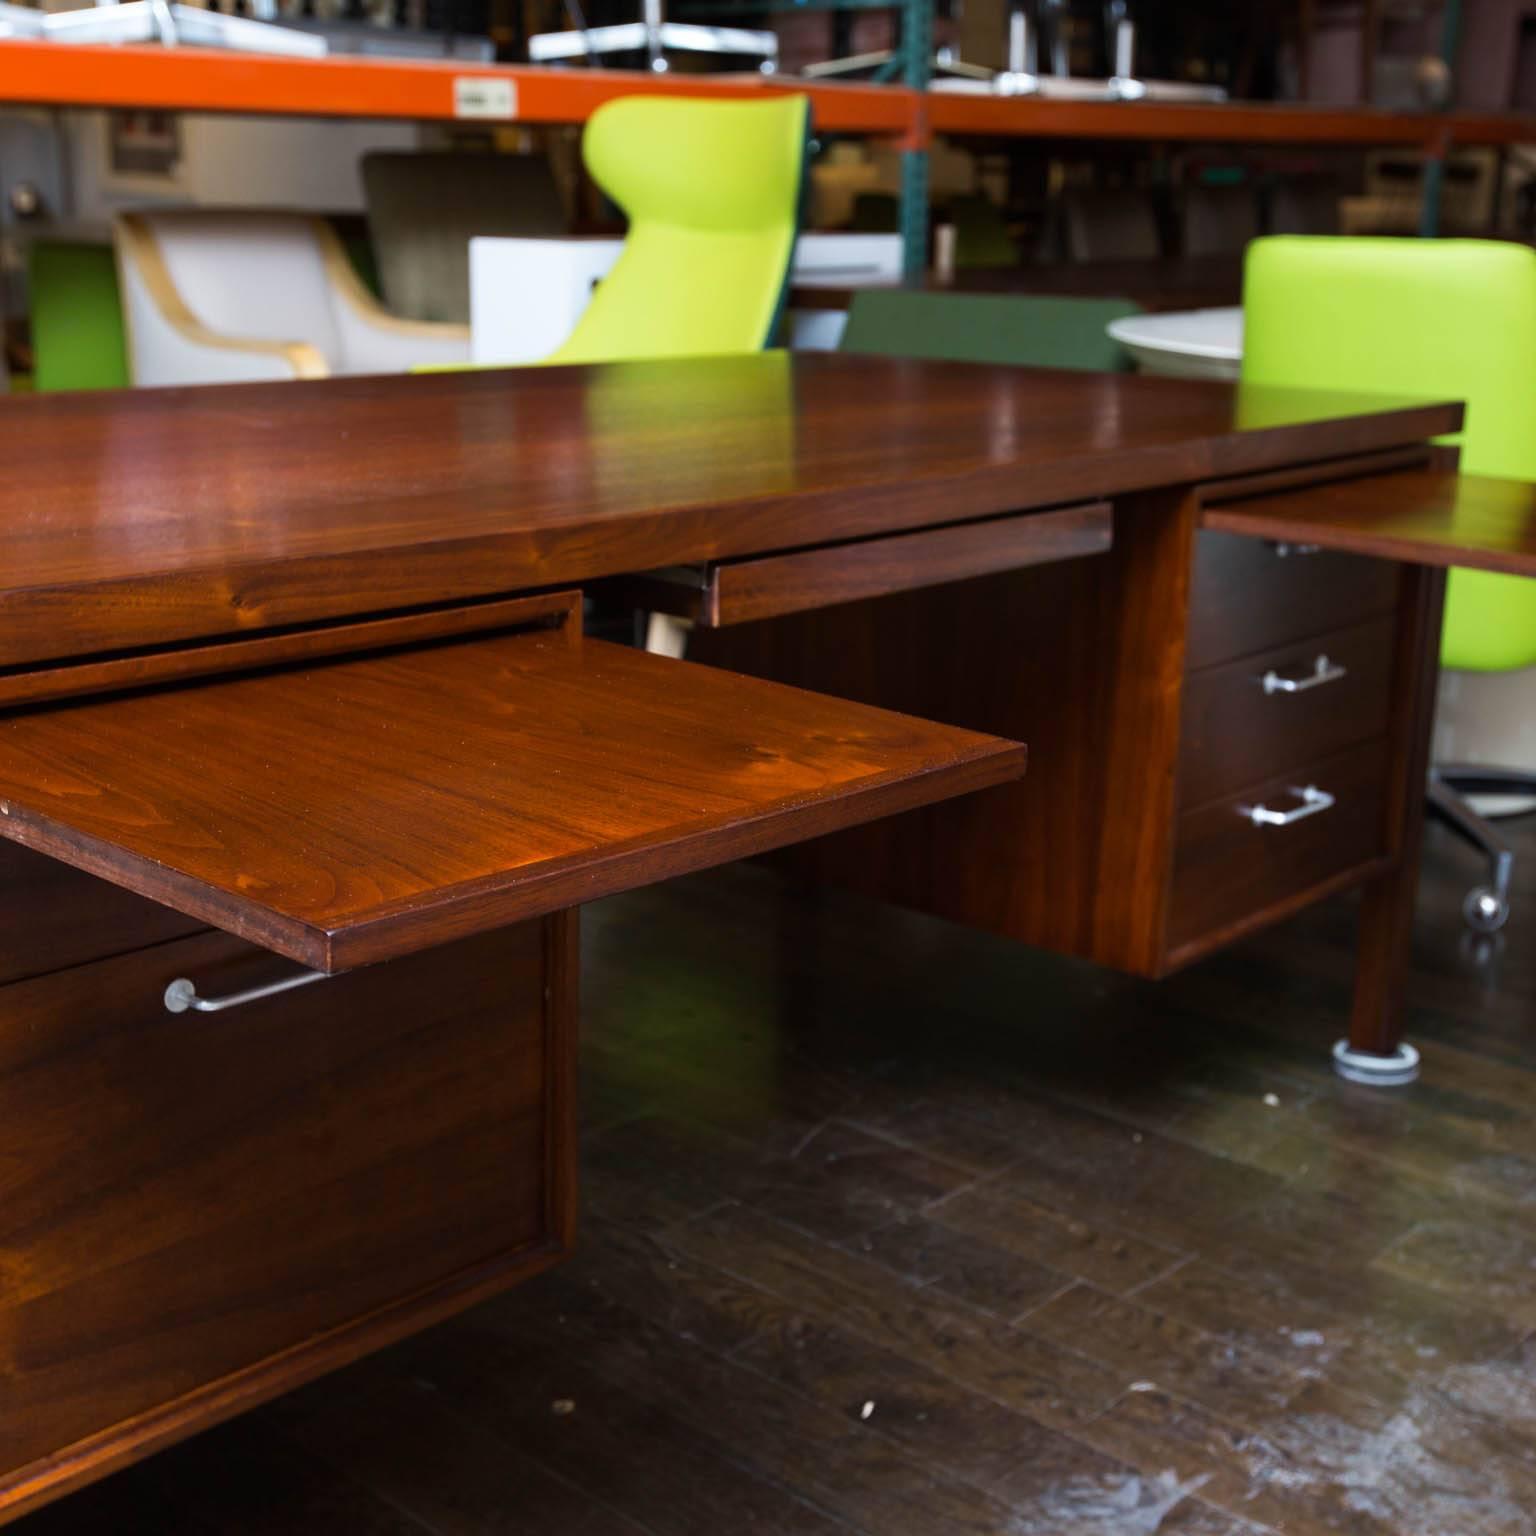 This rare walnut desk by Risom has just been professionally refinished.